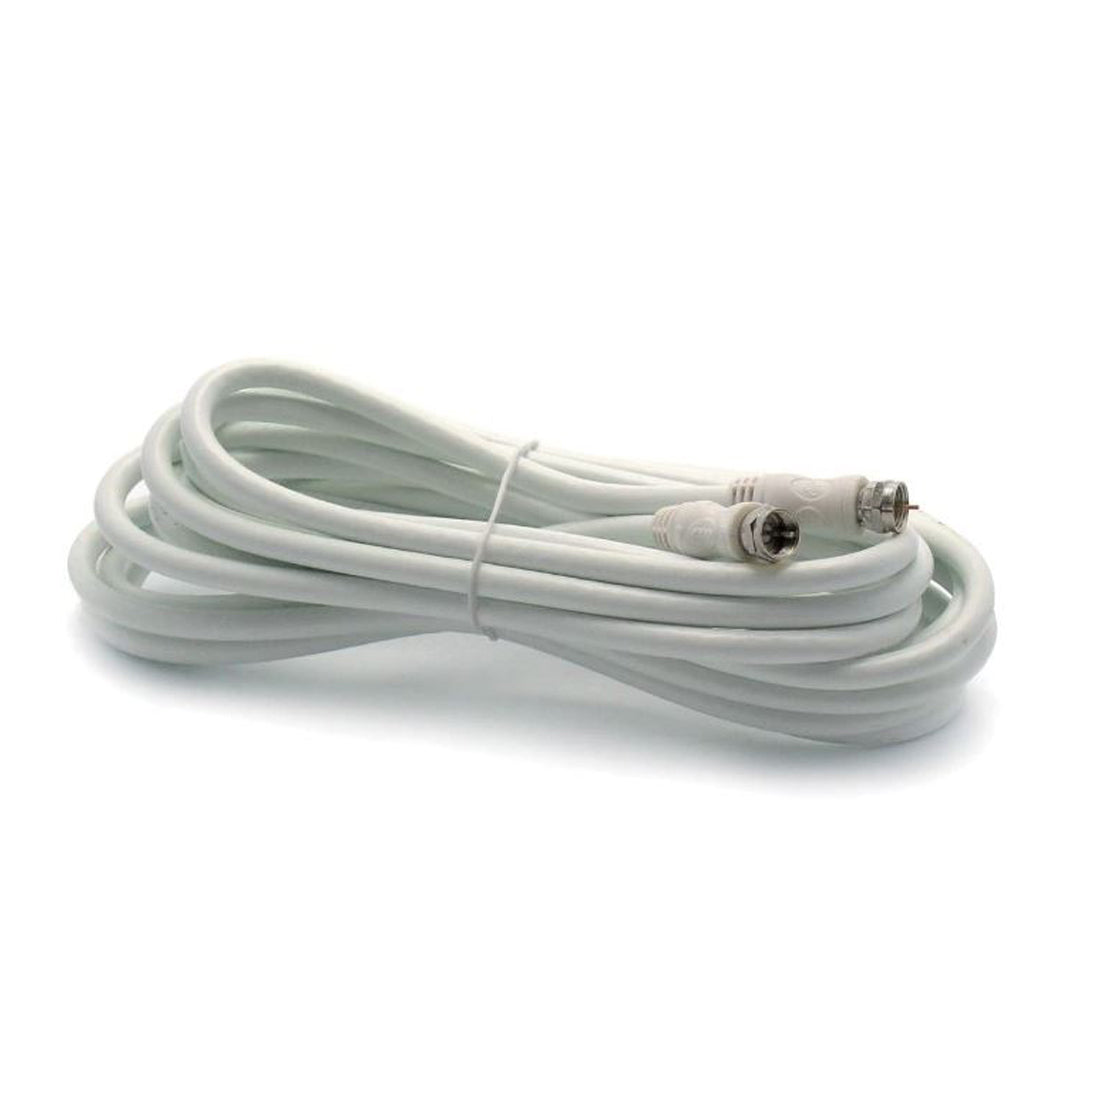 Metronic SAT to FM/M coaxial extension cable. white, satellite cable, TV antenna cable, 2 m